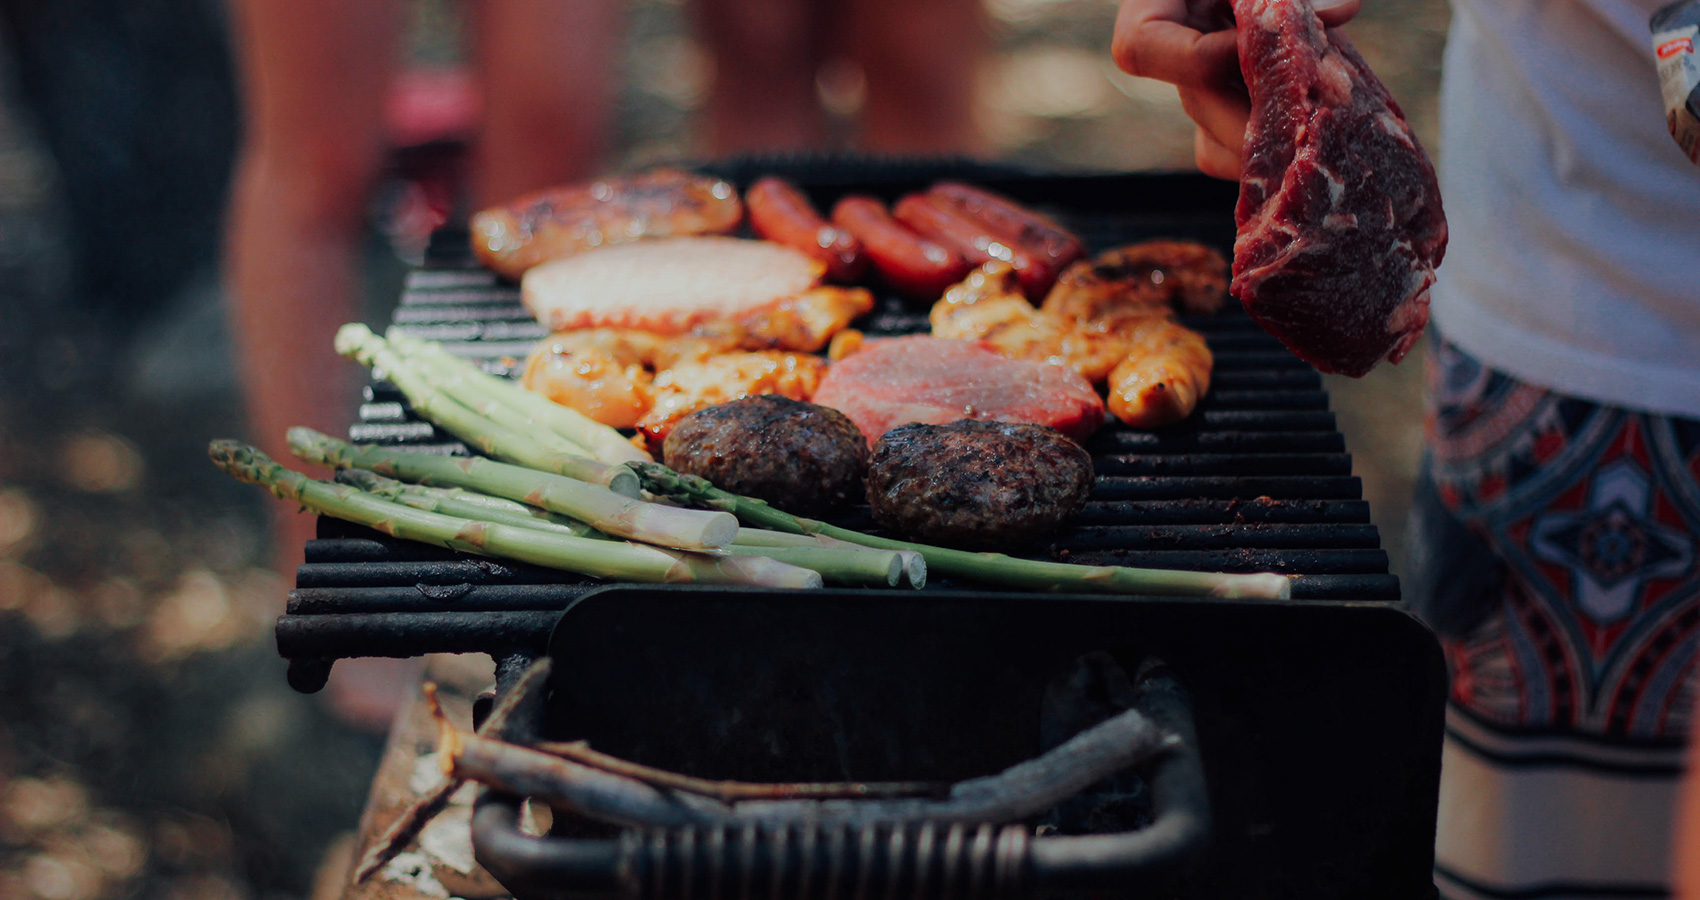 Is Grilled Food Bad For Me?